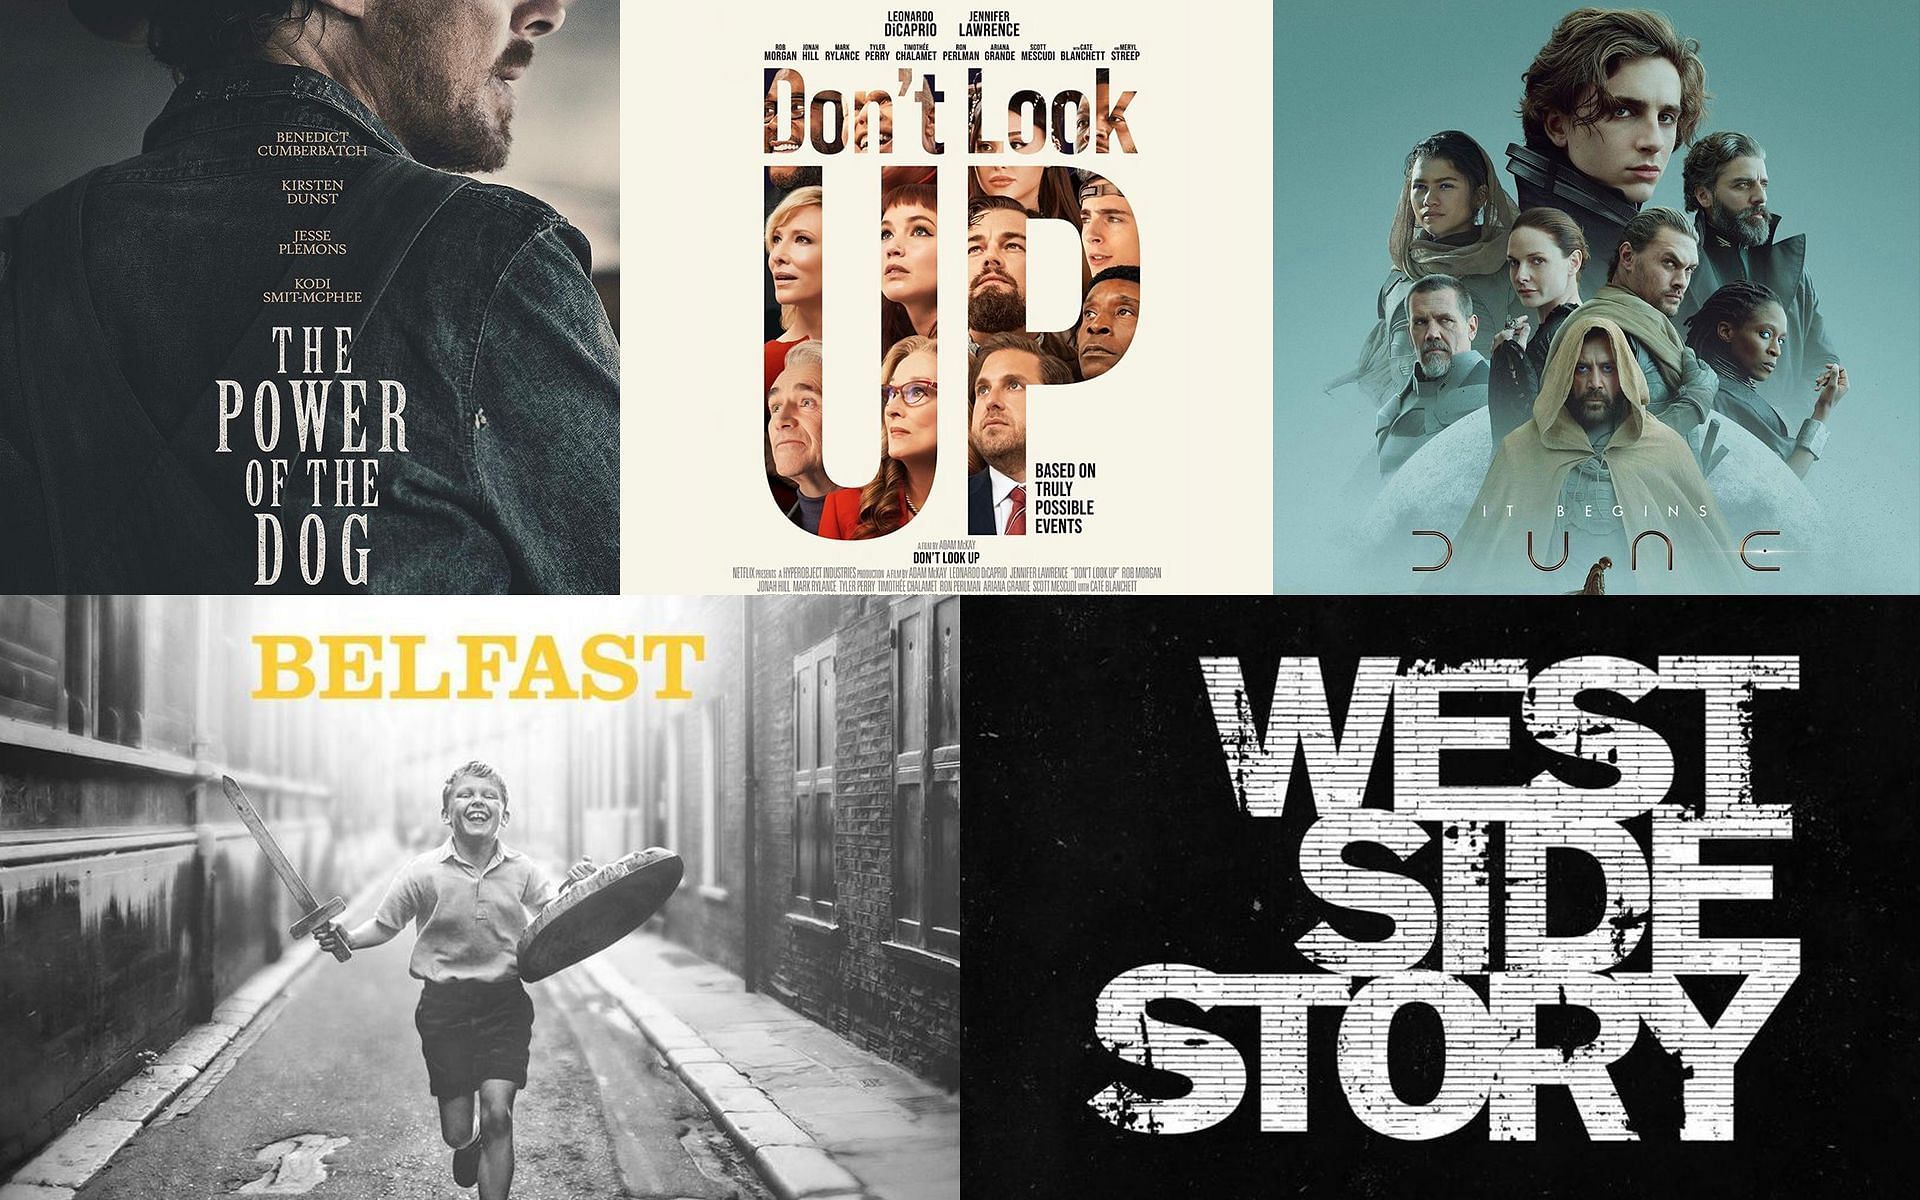 Five movies that made a mark for Oscars 2022 nominations predictions (Image via @dunemovie/Instagram, @westsidestorymovie/Instagram, @belfastmovie/Instagram, @powerofthedogfilm/Instagram, dontlookupfilm/Instagram)